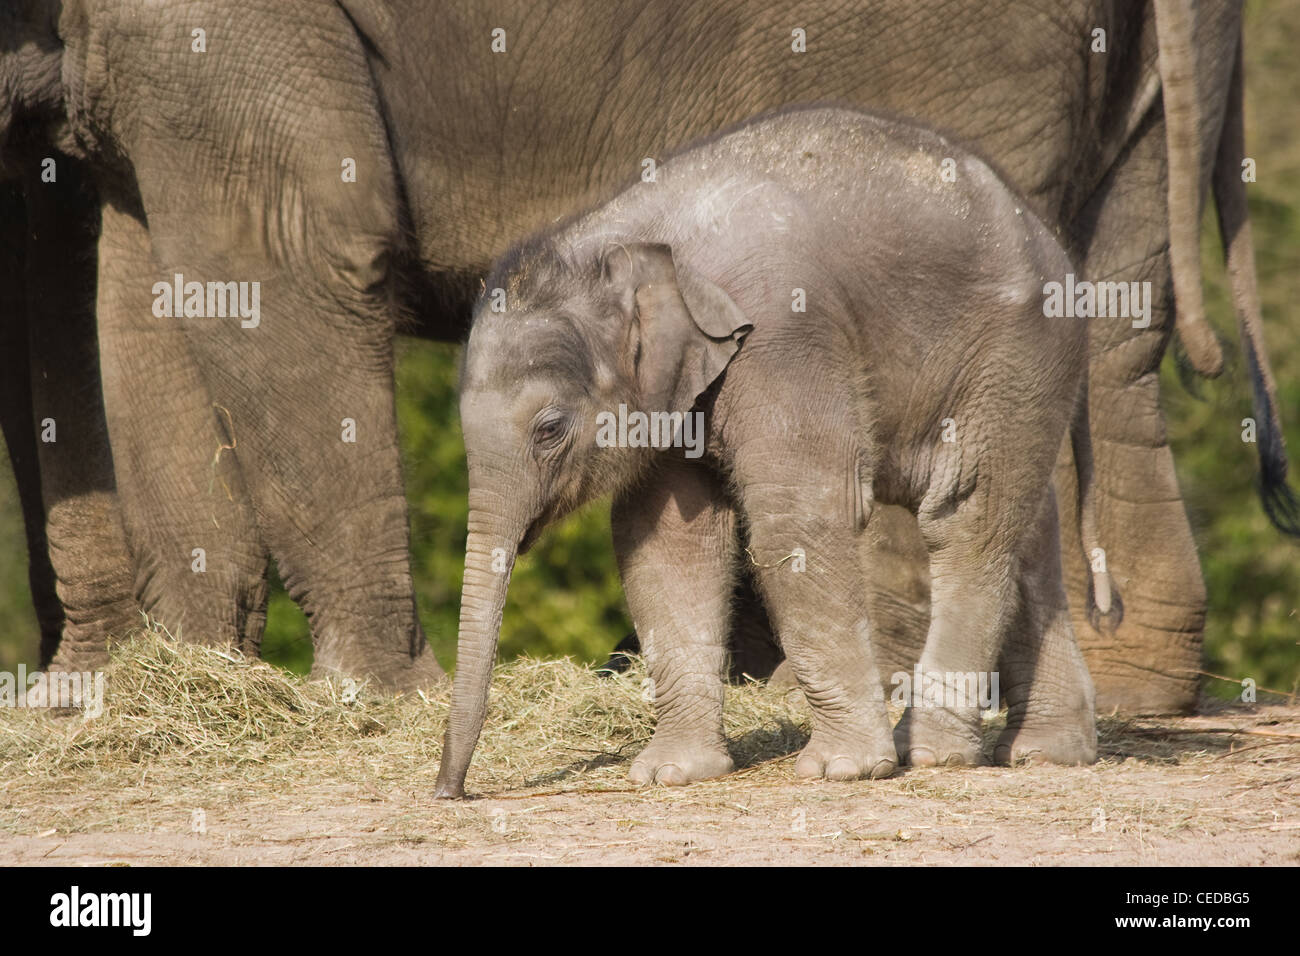 Female asian baby elephant or Elephas maximus walking with her mother Stock Photo